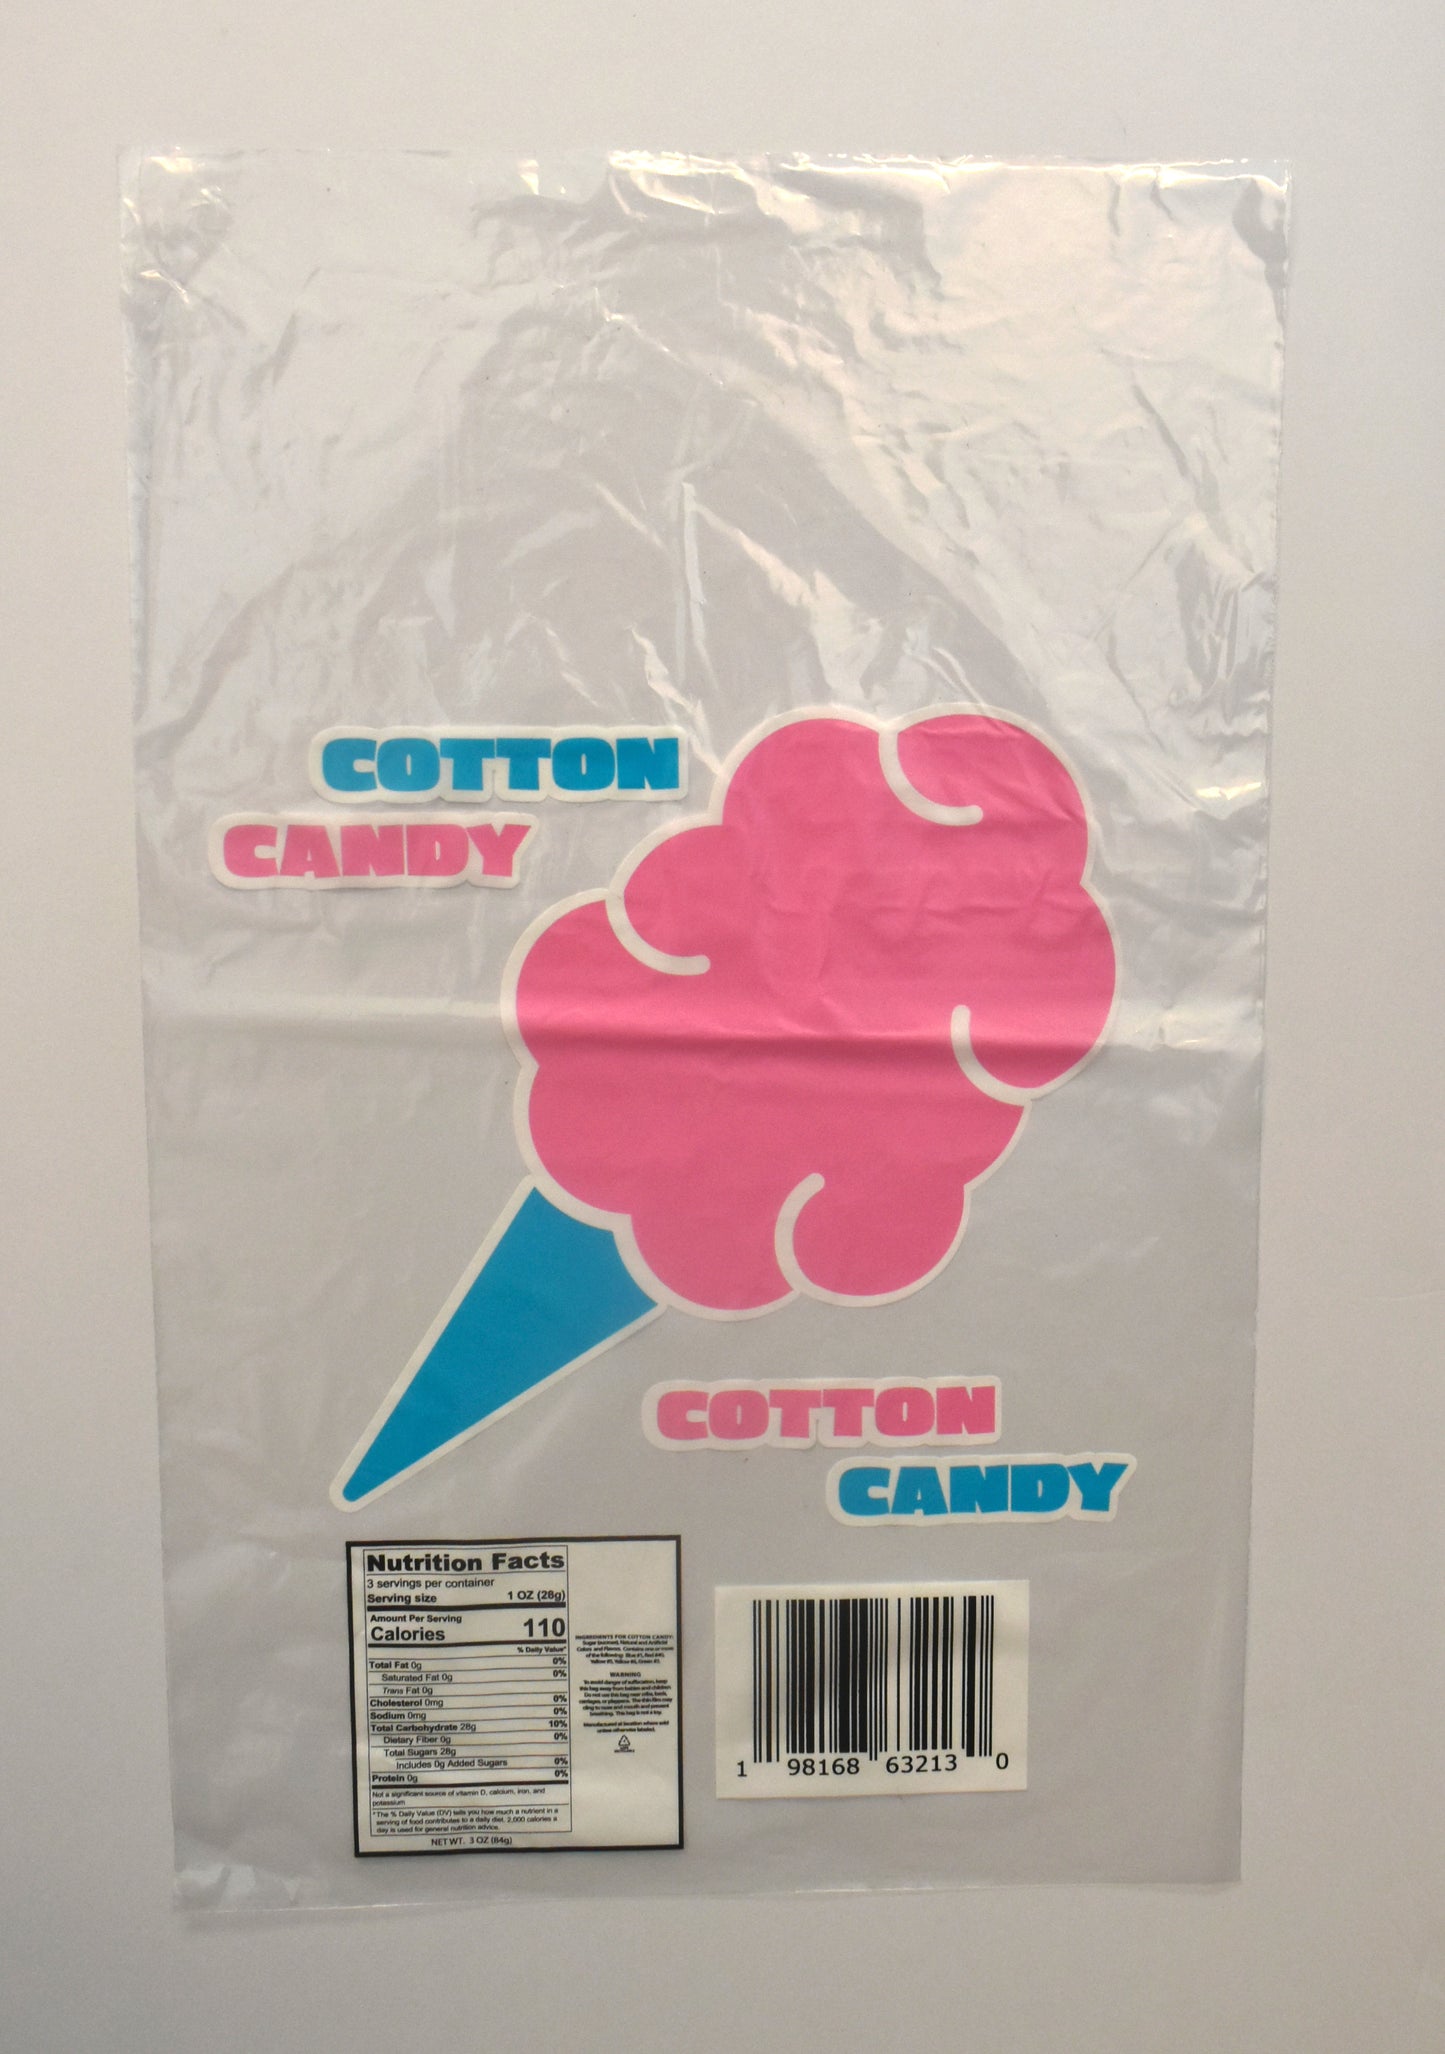 NEW! Cotton Candy Bags - Poly Bag LLC